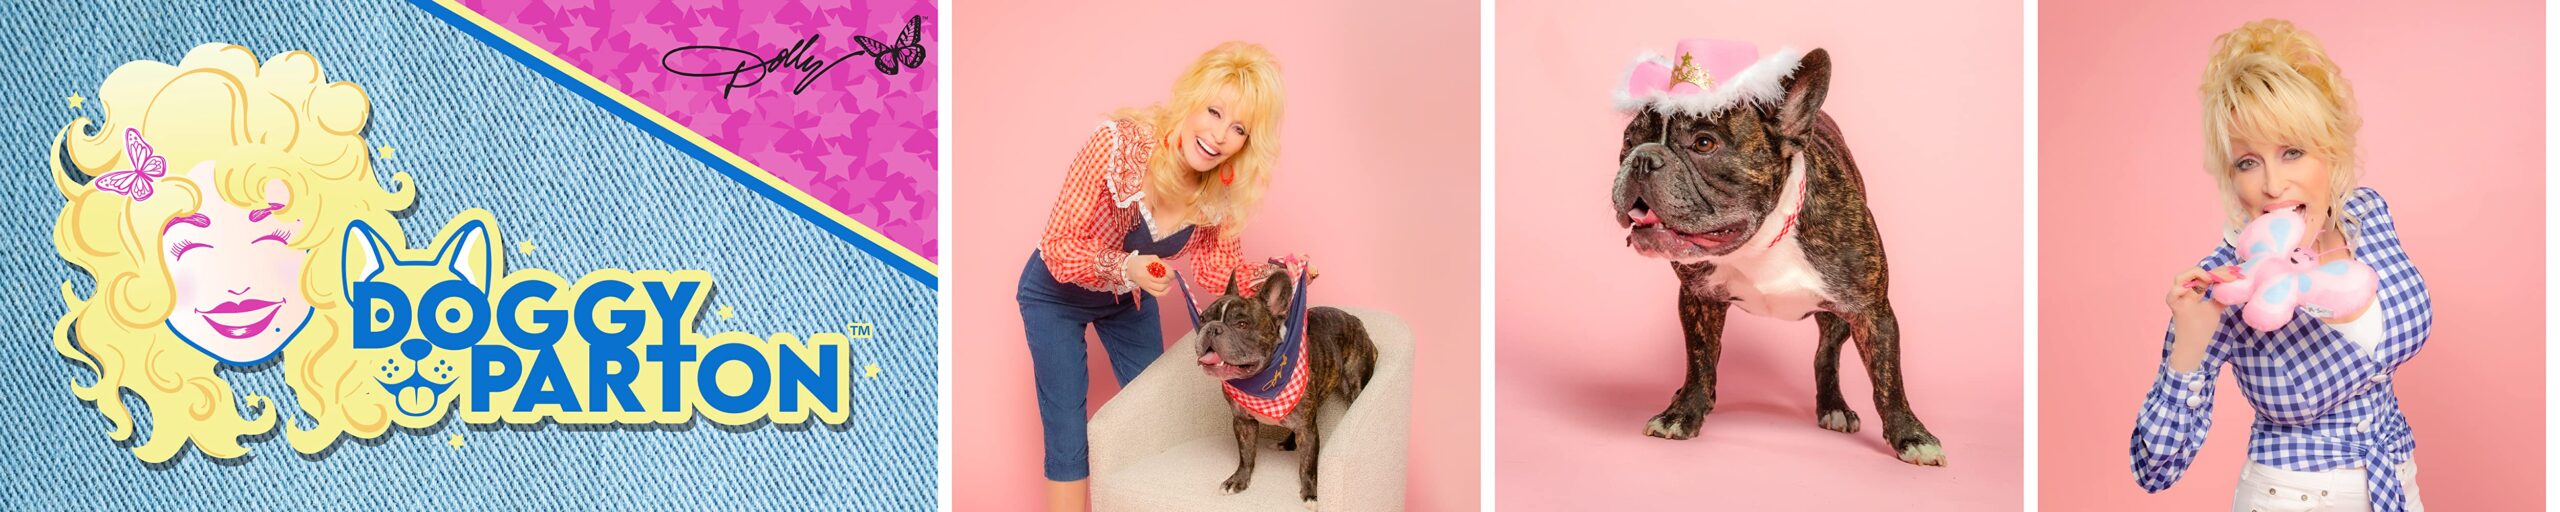 Dolly Parton Launches Doggy Parton Line, Proceeds Supporting Willa B. Farms